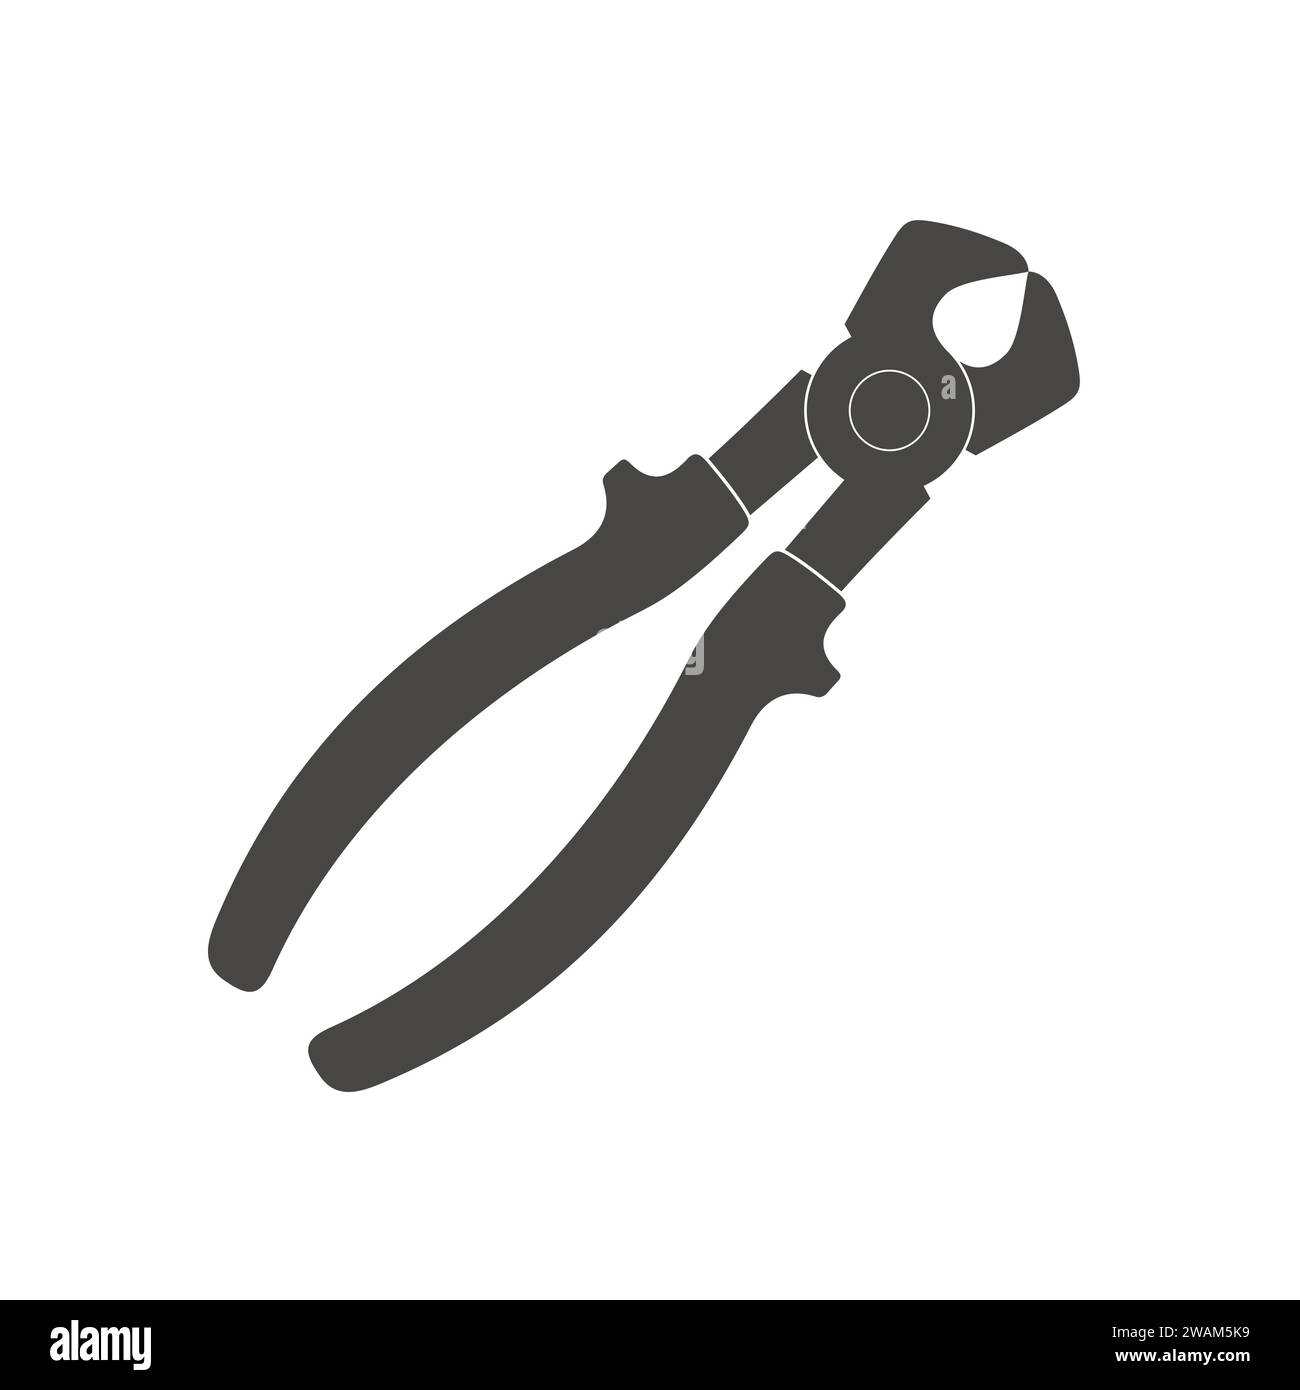 Cutting pliers icon isolated on white background. Builder, construction and repair hand tools with plastic handles. Cutting pliers pliers vector illus Stock Vector